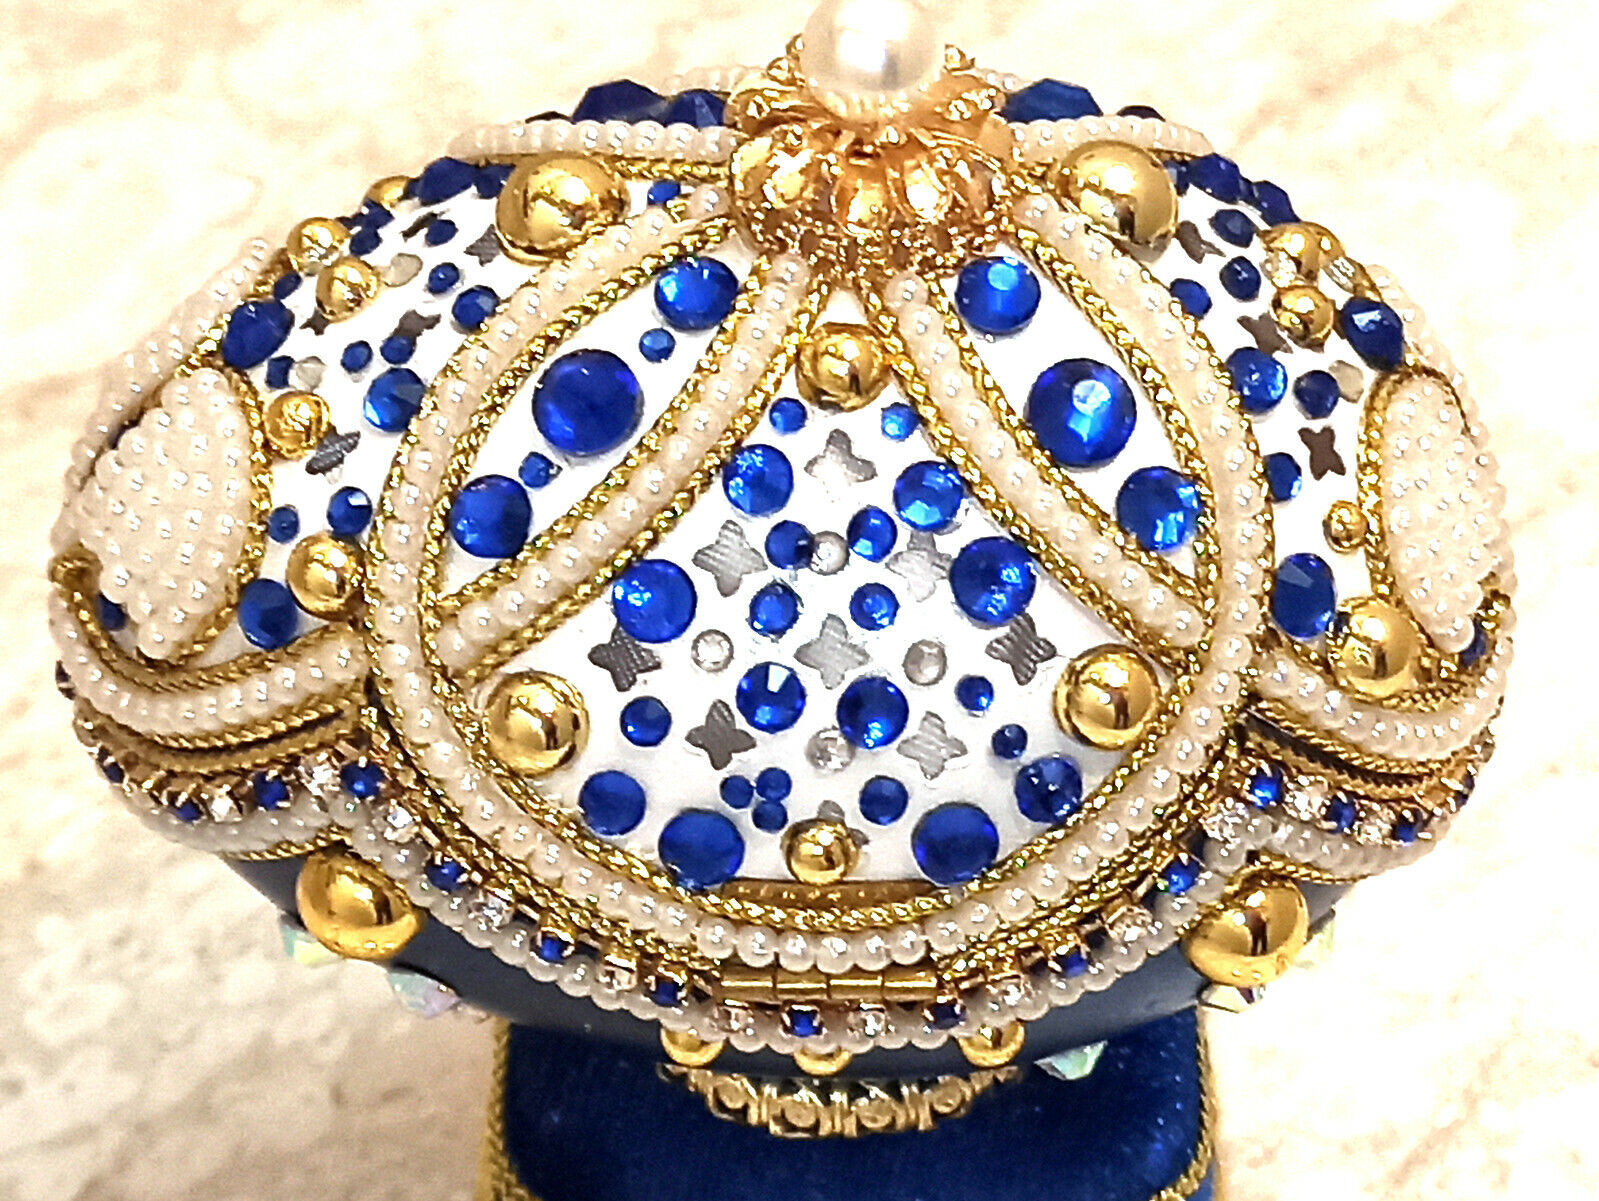 Luxury Limited Edition Faberge egg REal Natural egg Musical 24k gold Sapphire HM